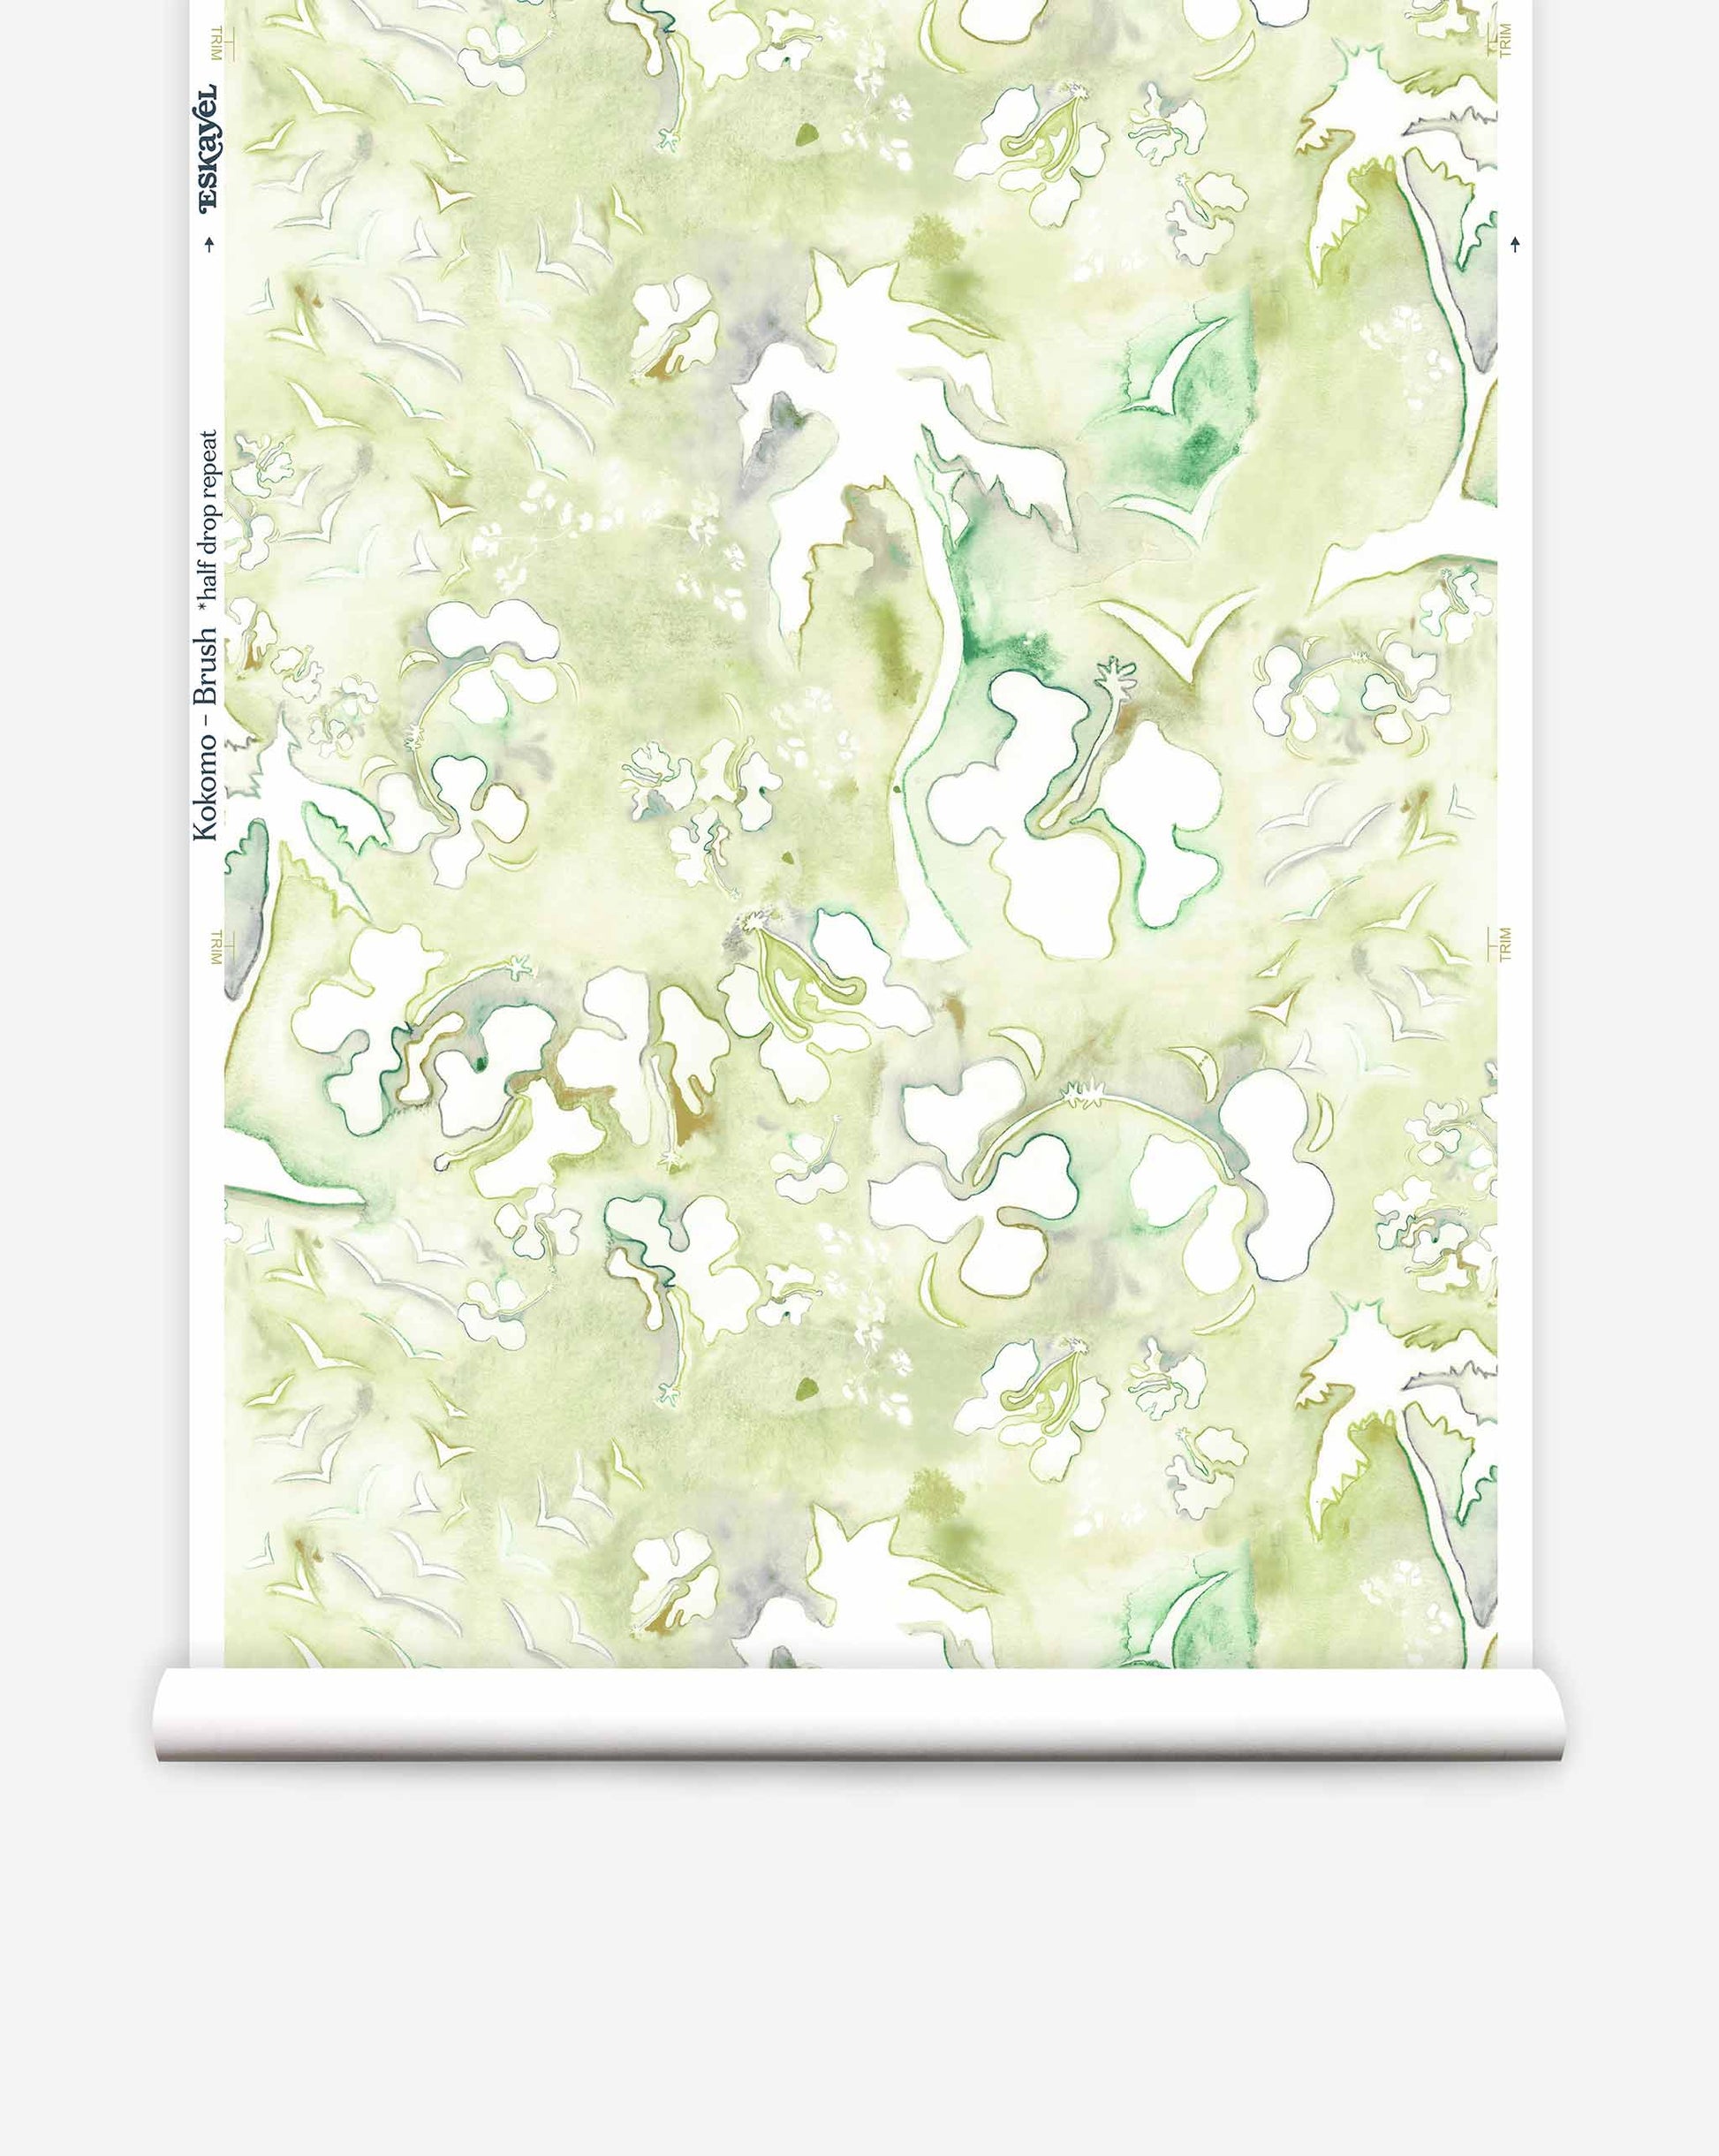 Based on an imaginary tropical landscape, Eskayel’s Kokomo wallpaper in Brush features shades of green.